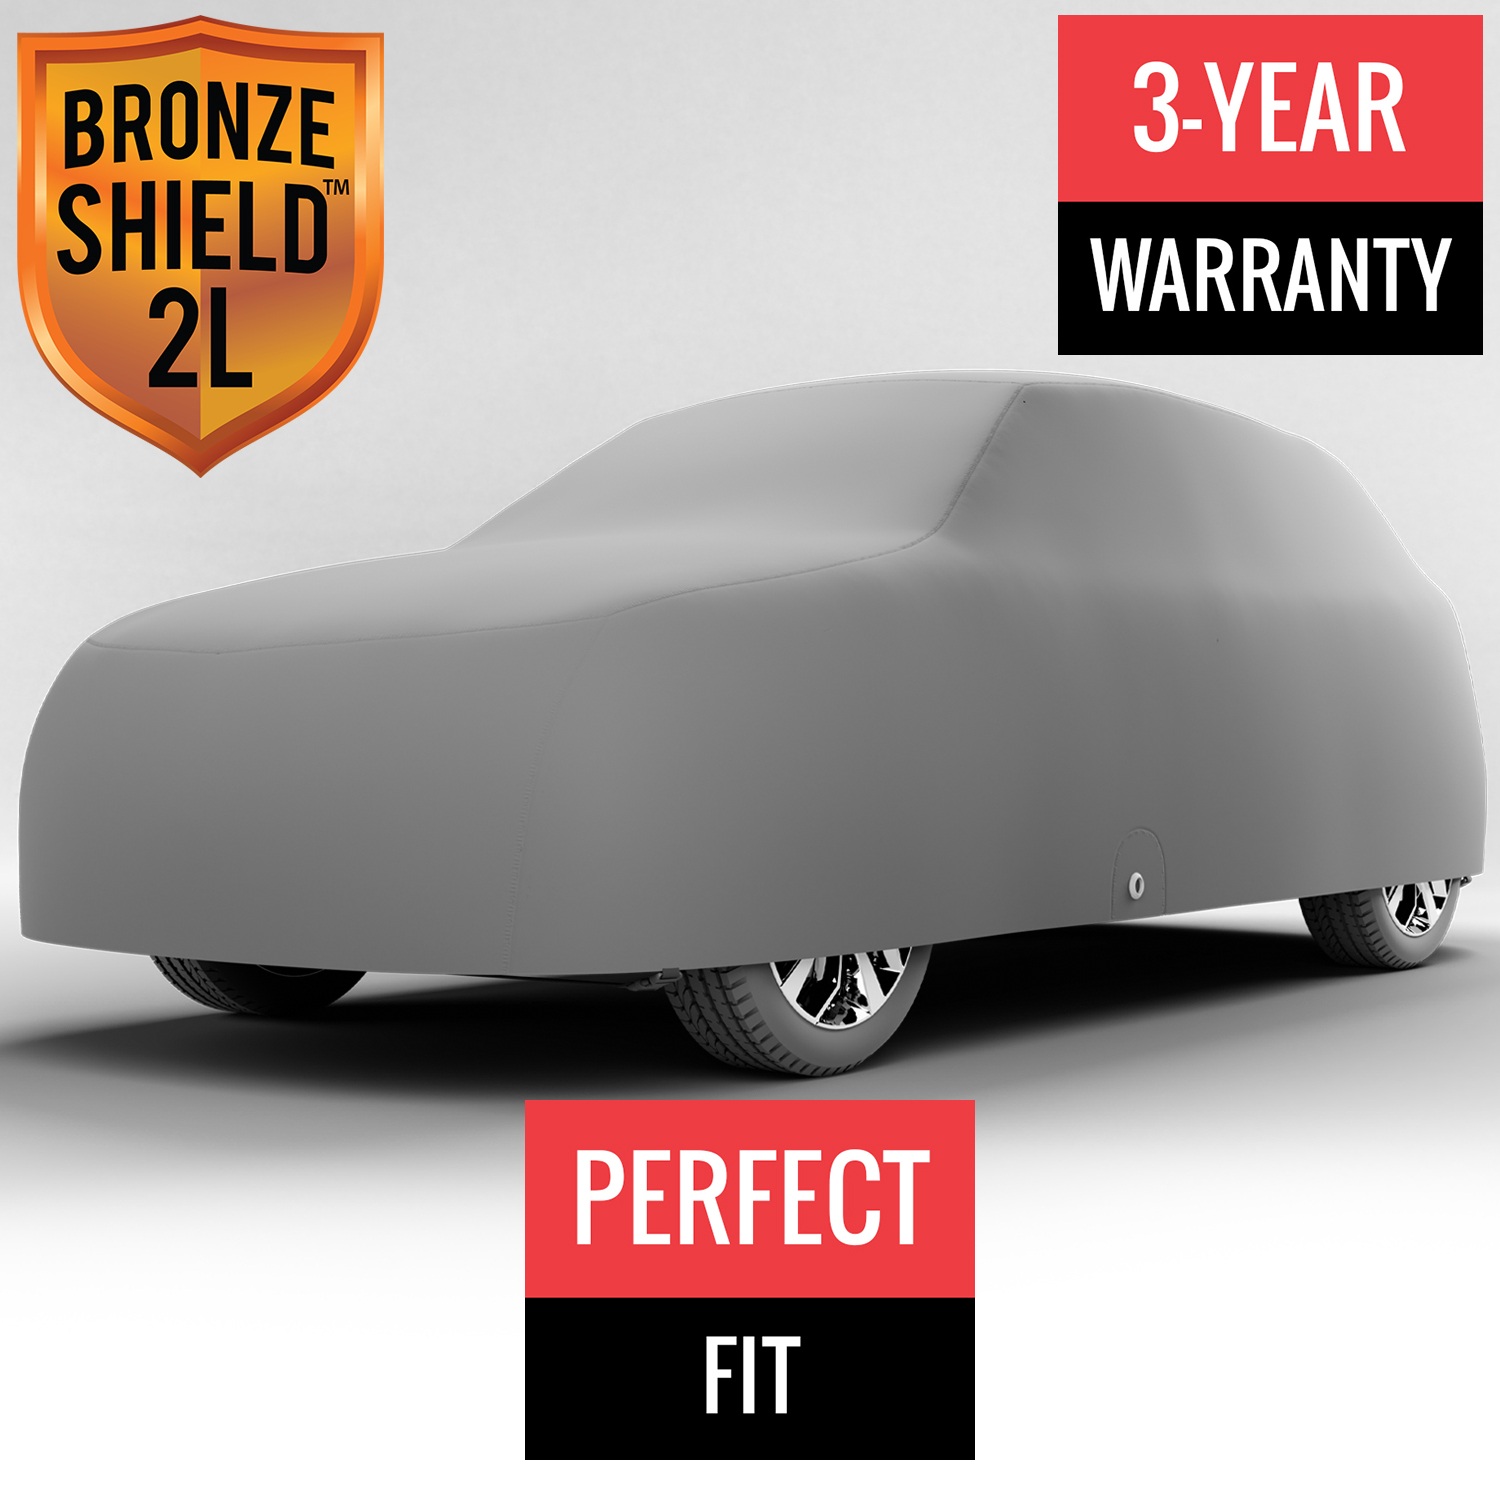 Bronze Shield 2L - Car Cover for Ford Edge 2020 SUV 4-Door